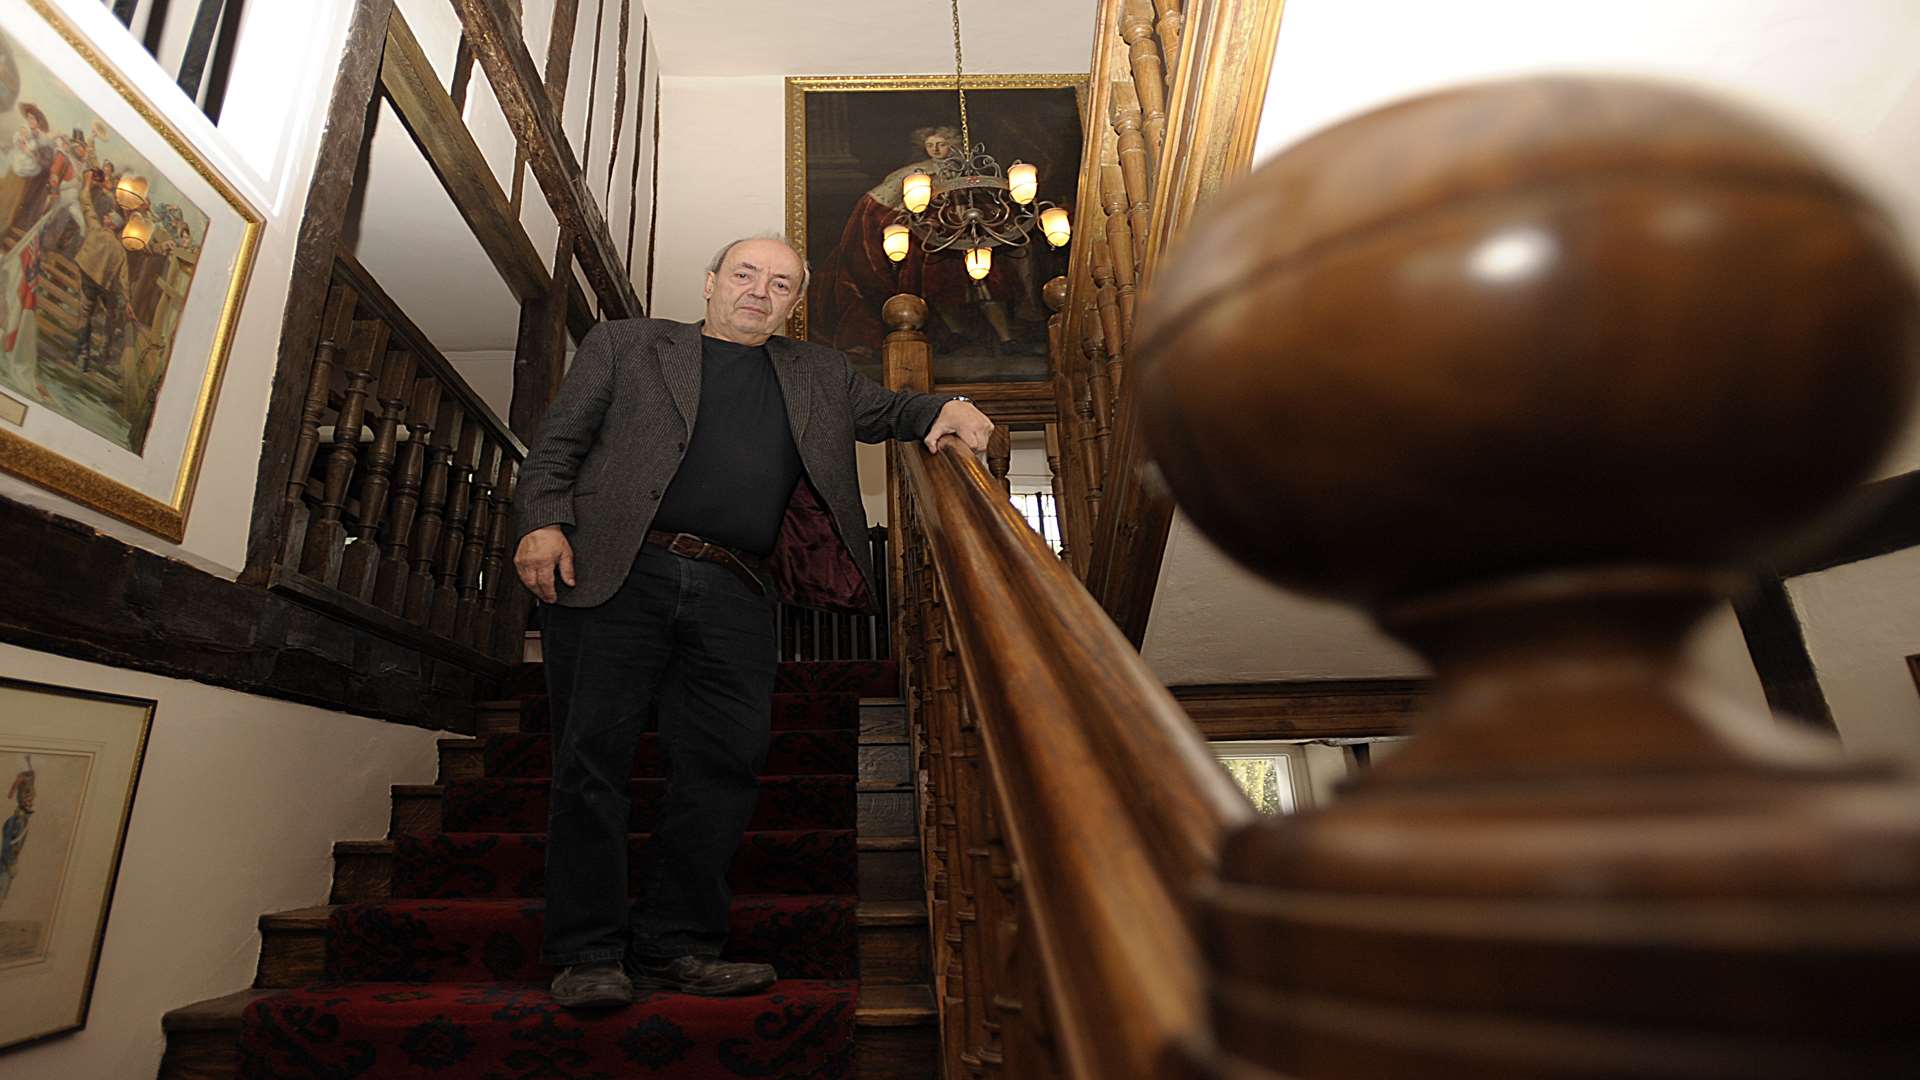 Peter Malkin has completed a major restoration work at the stately home, including a priceless new staircase